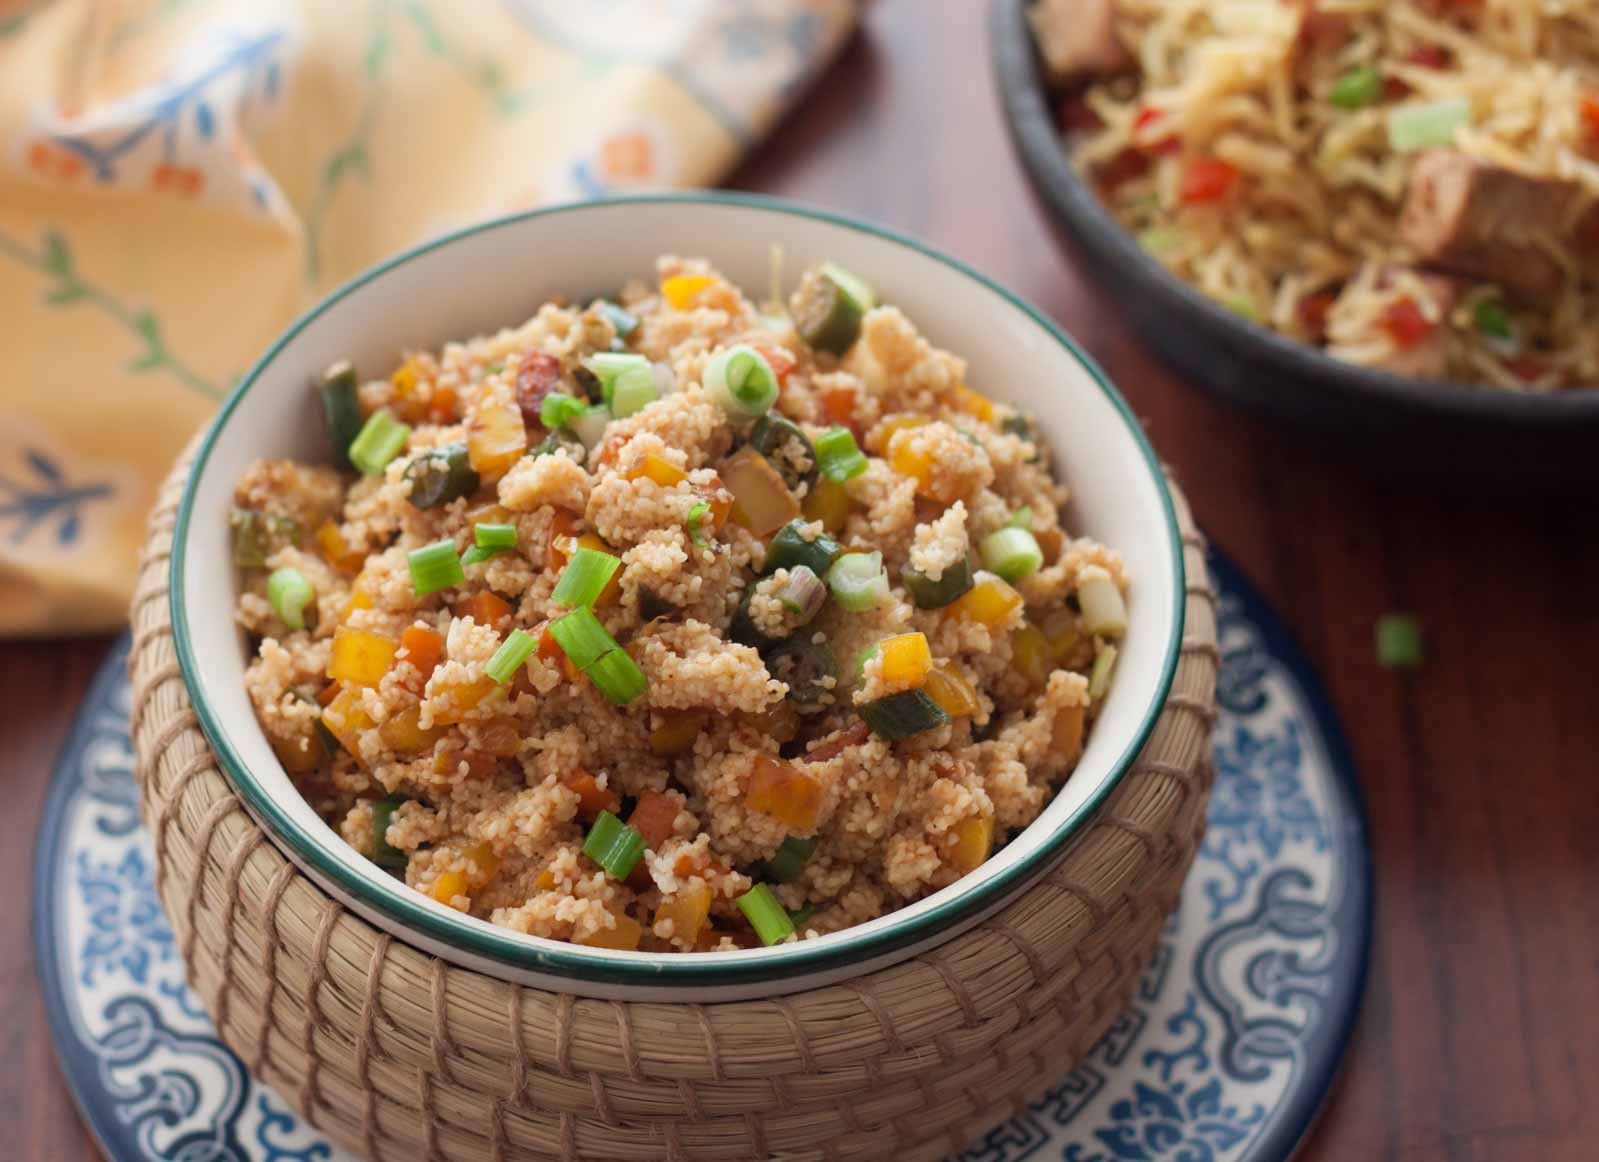 Foxtail Millet Fried Rice Recipe